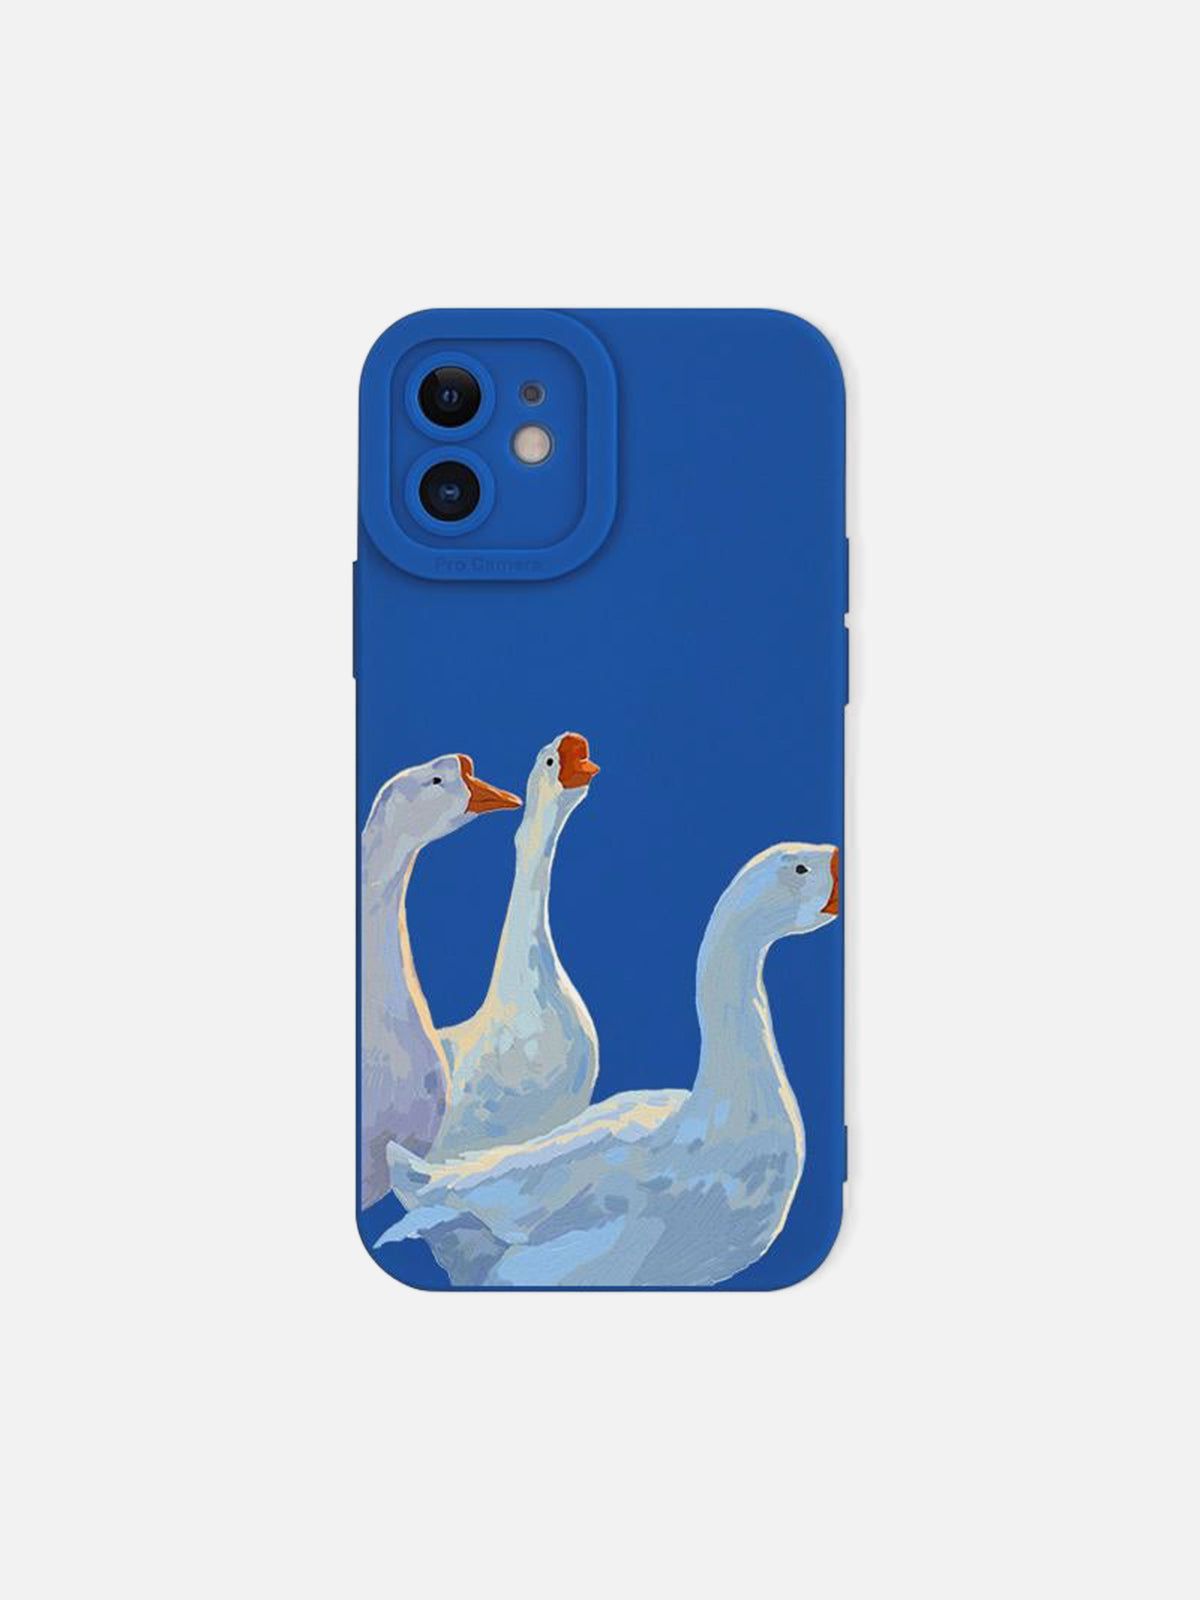 "Big White Goose" Mobile Phone Case for IPhone Streetwear Brand Techwear Combat Tactical YUGEN THEORY